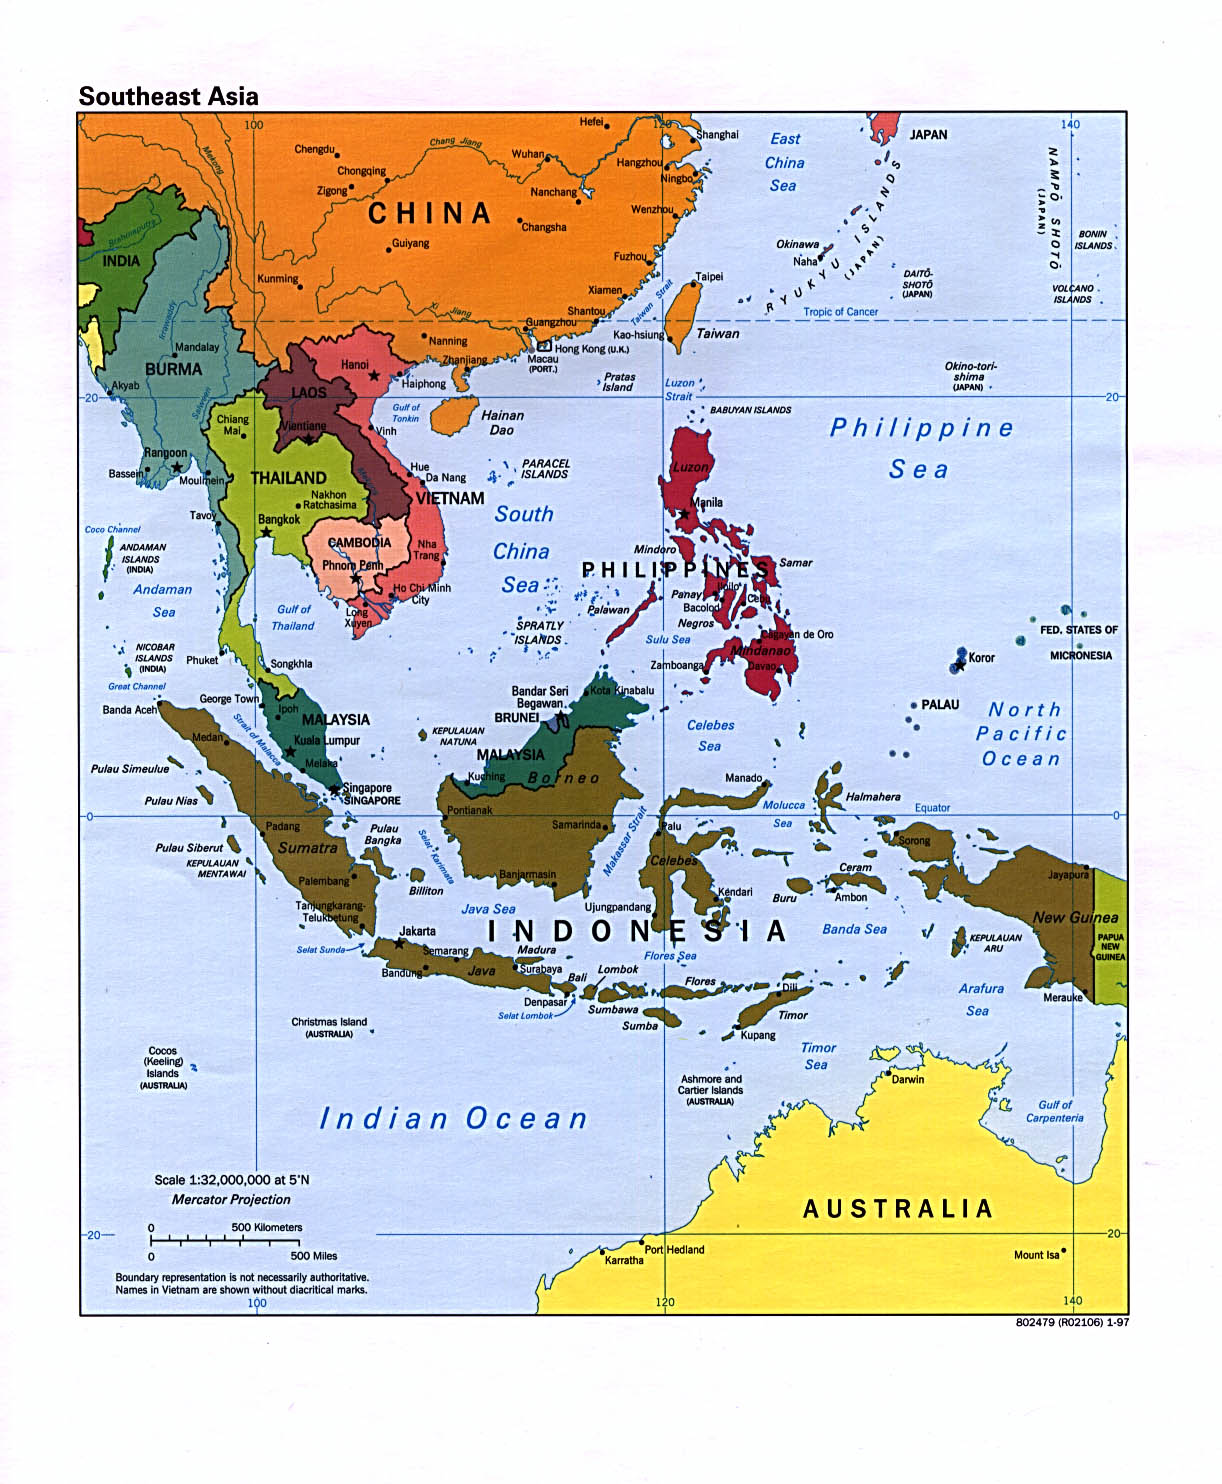 Landforms And Bodies Of Water In South East Asia 53